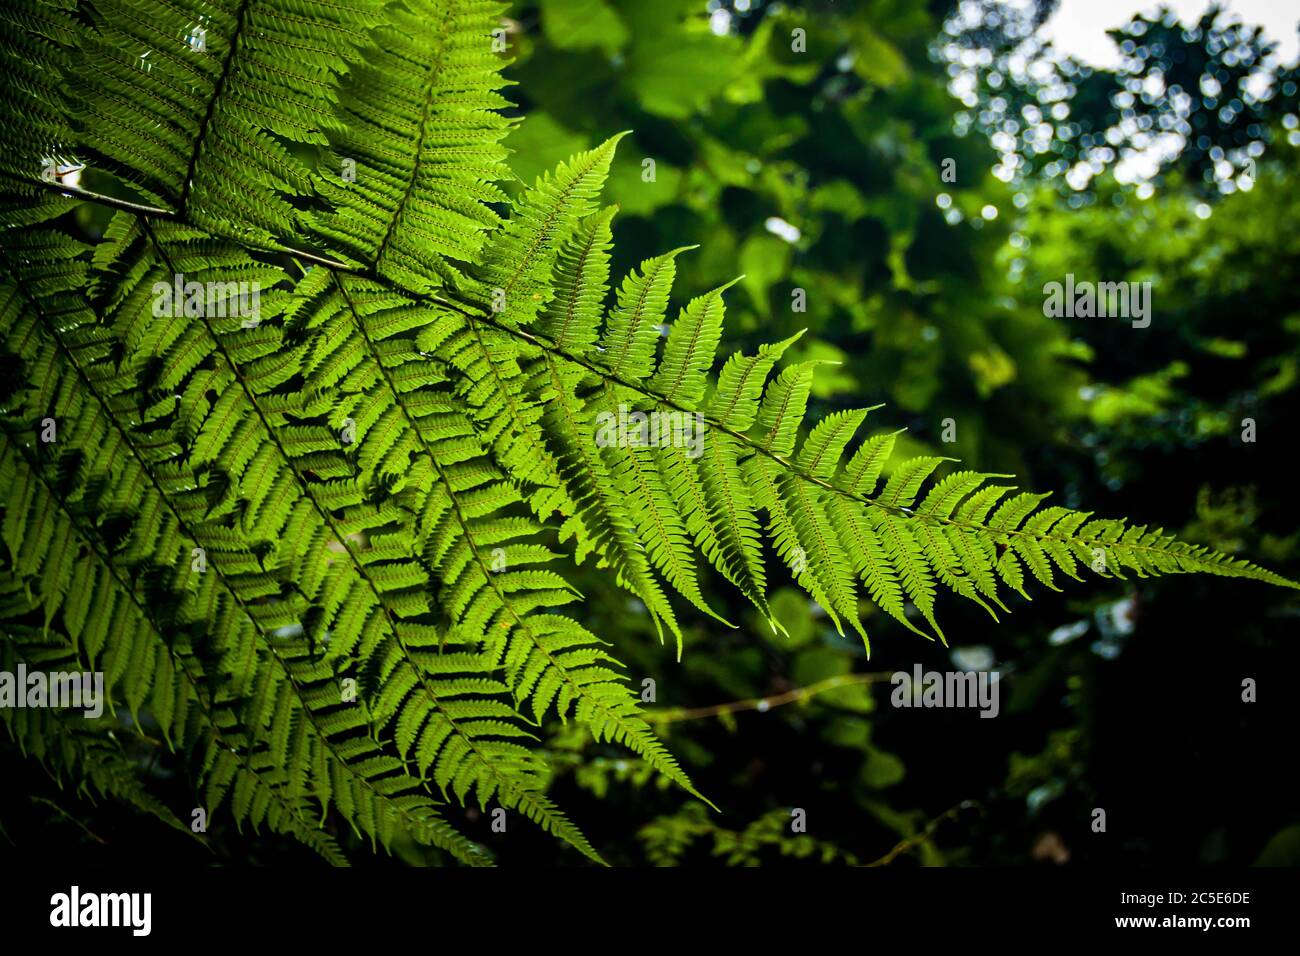 A close up image of a tropical plant in the rainforest in Sumatra Stock Photo